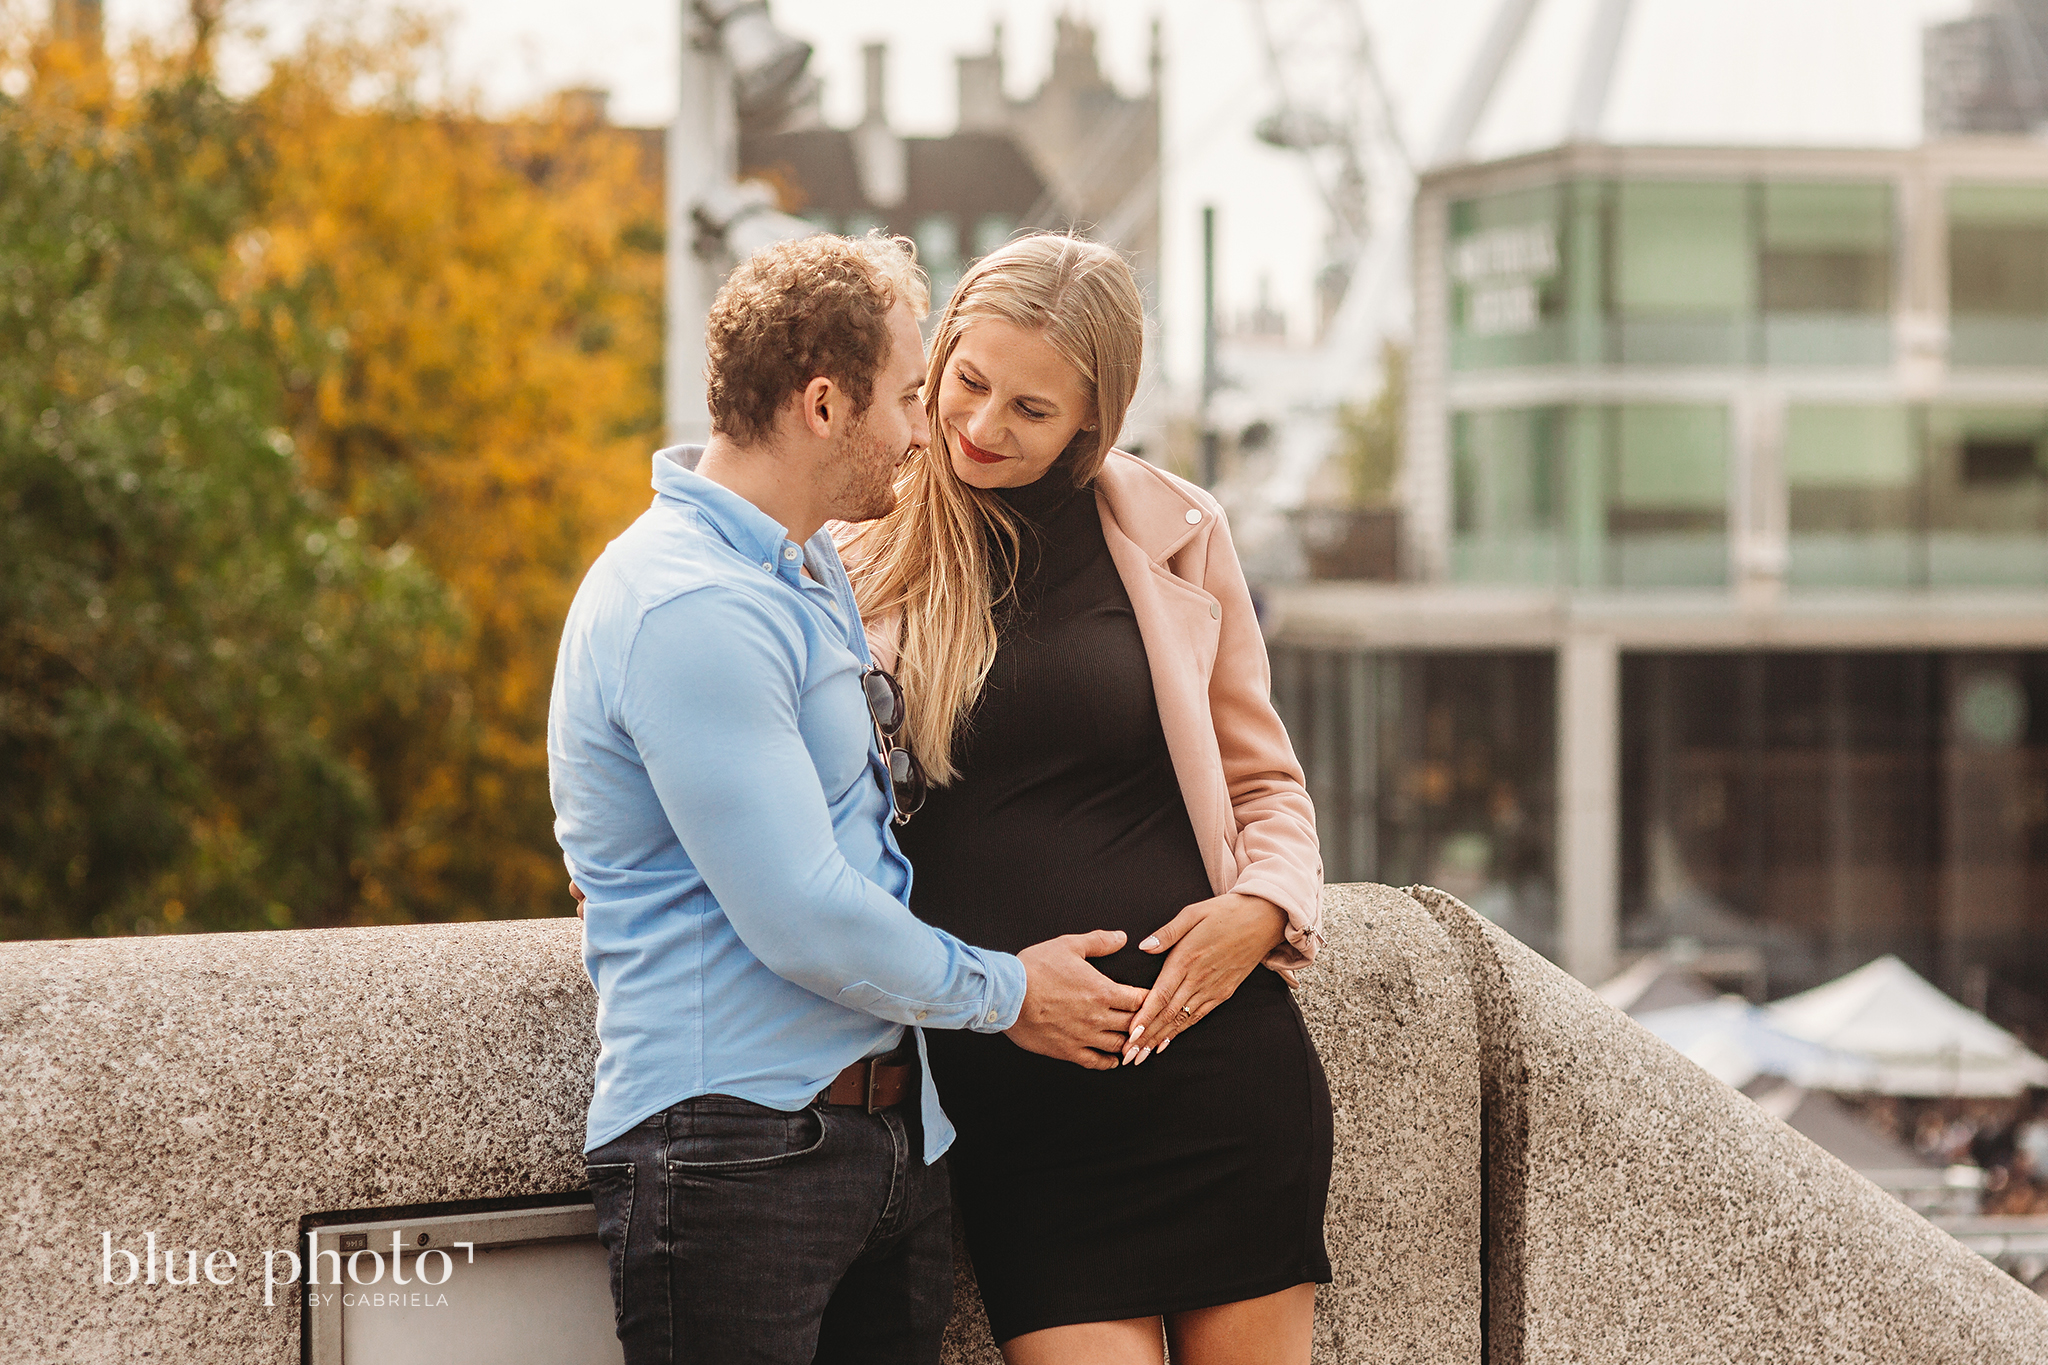 Angelika and Wojtek during their maternity session in South Bank, Central London. The couple is looking at each other and smiling. 